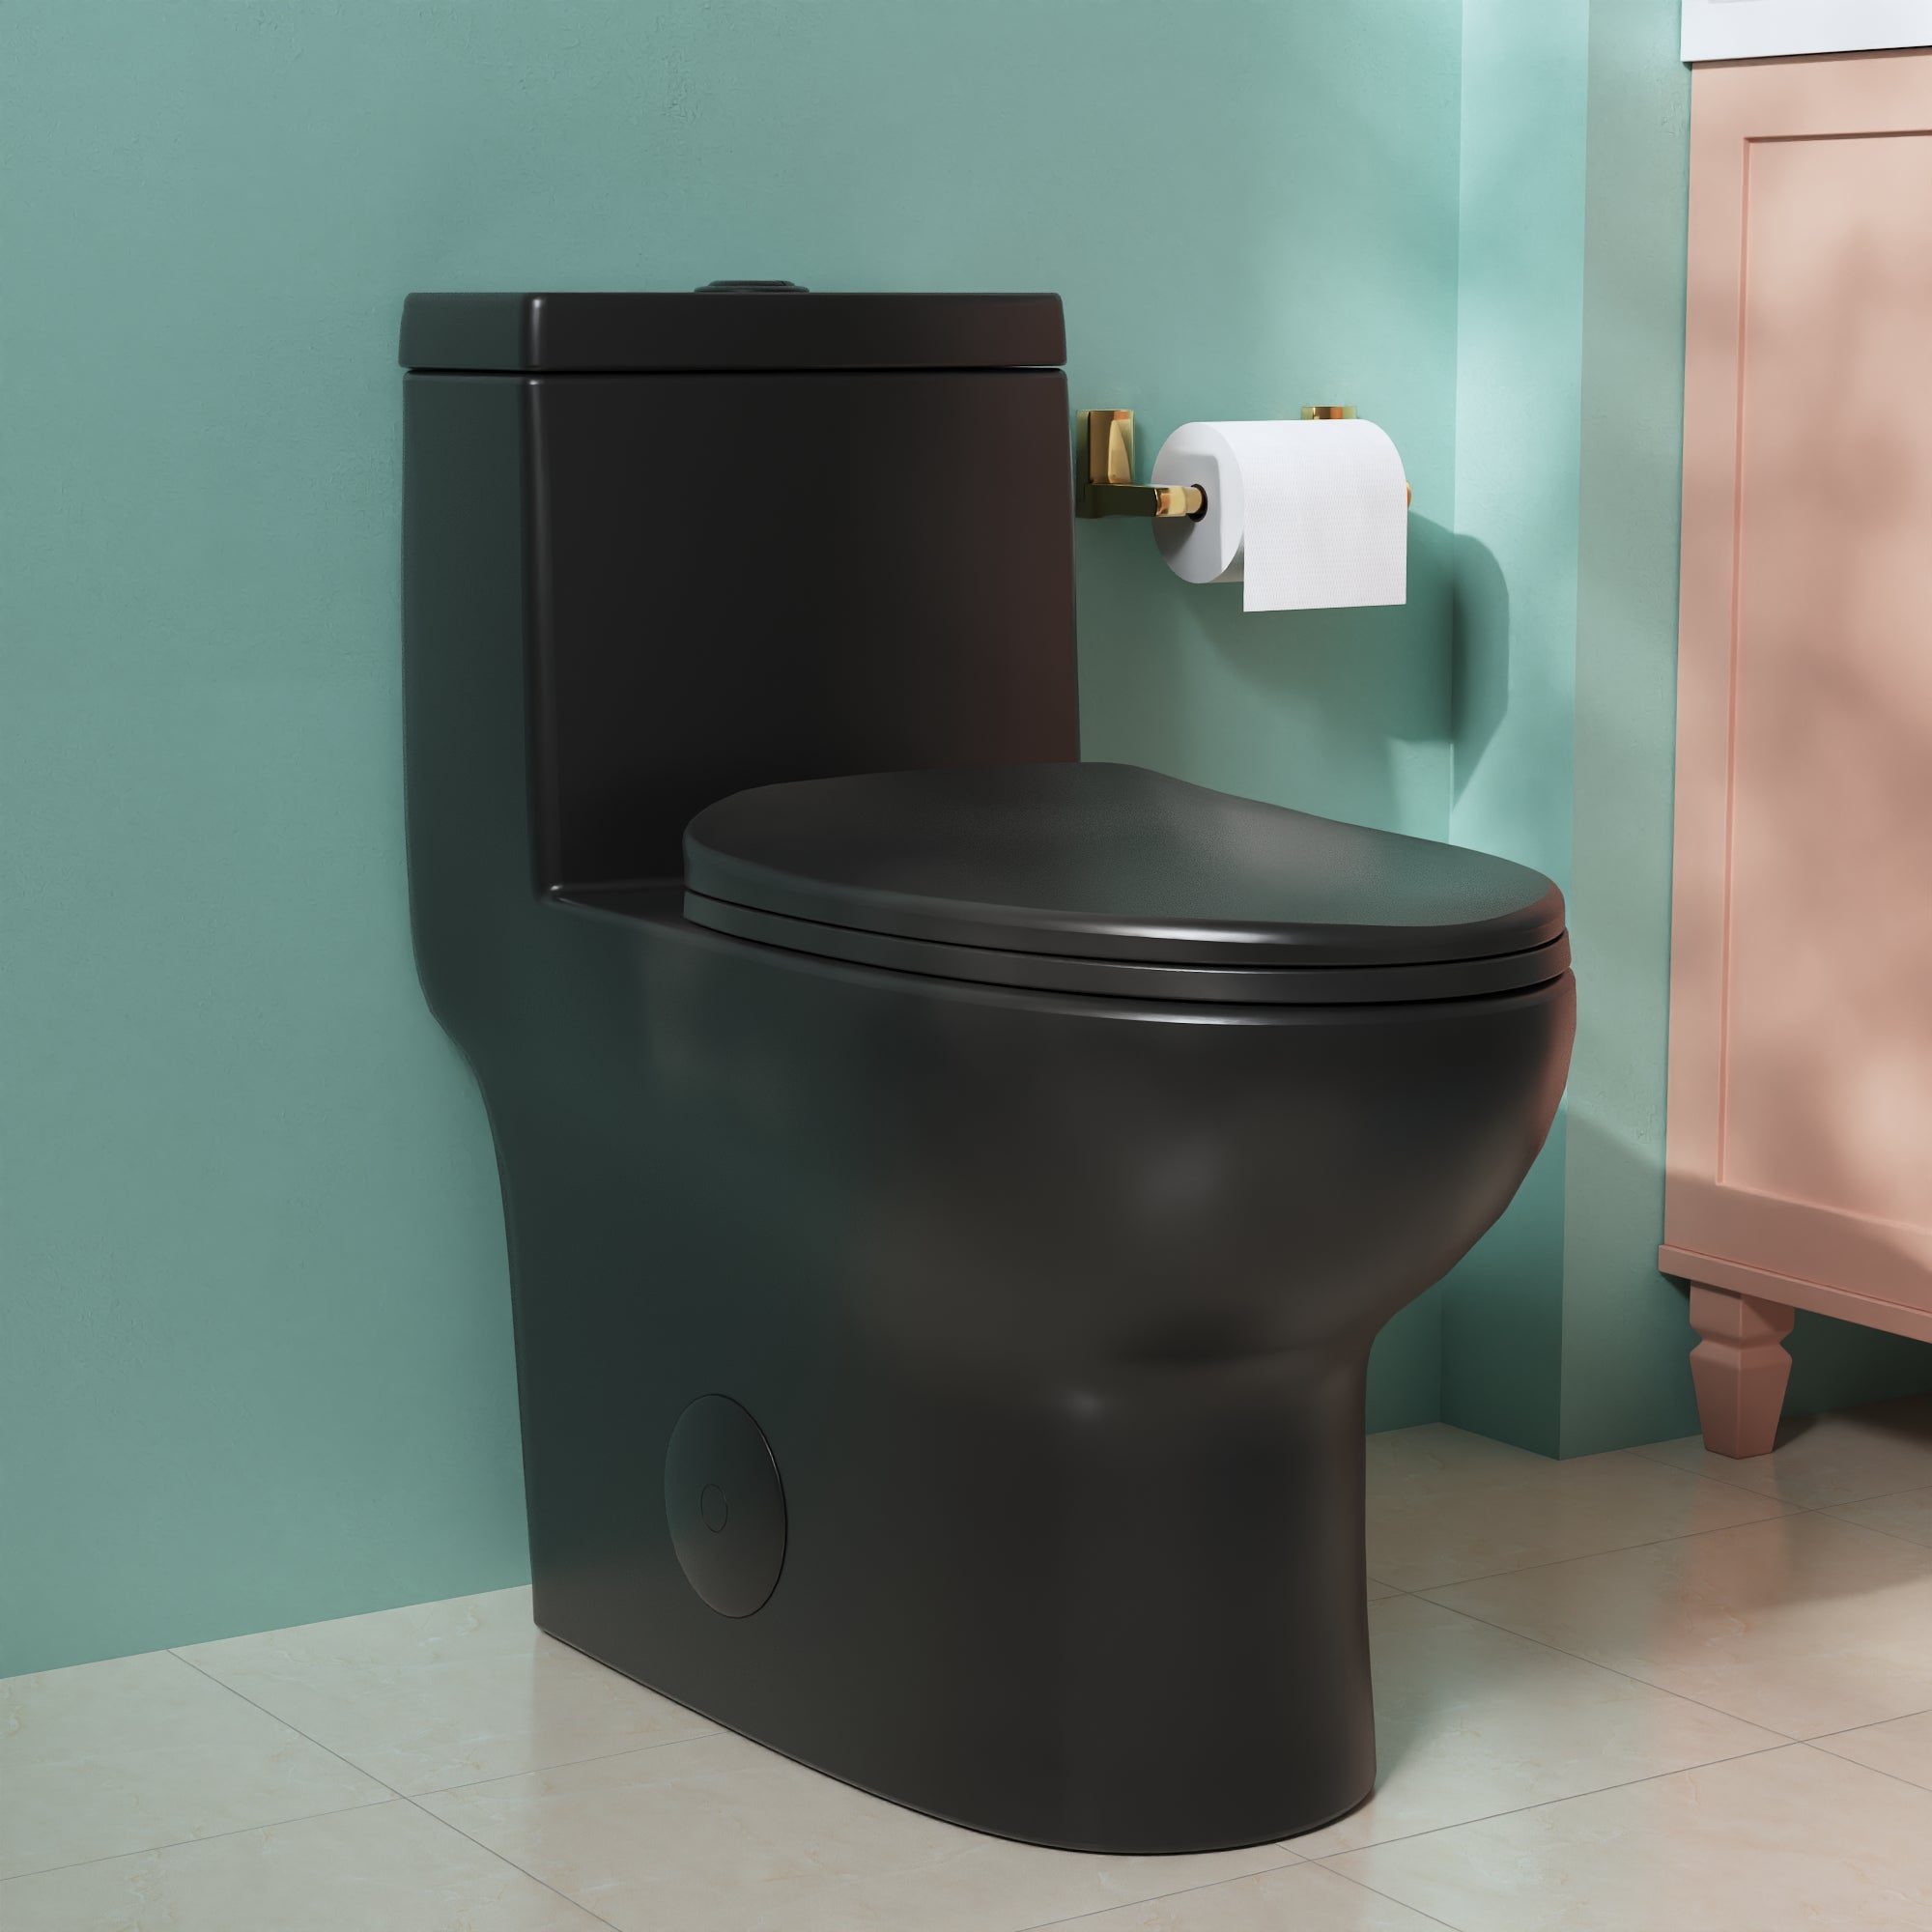 DeerValley Dv-1f026 Ally Dual Flush Elongated One-Piece Standard-Size Toilet (Seat Included)